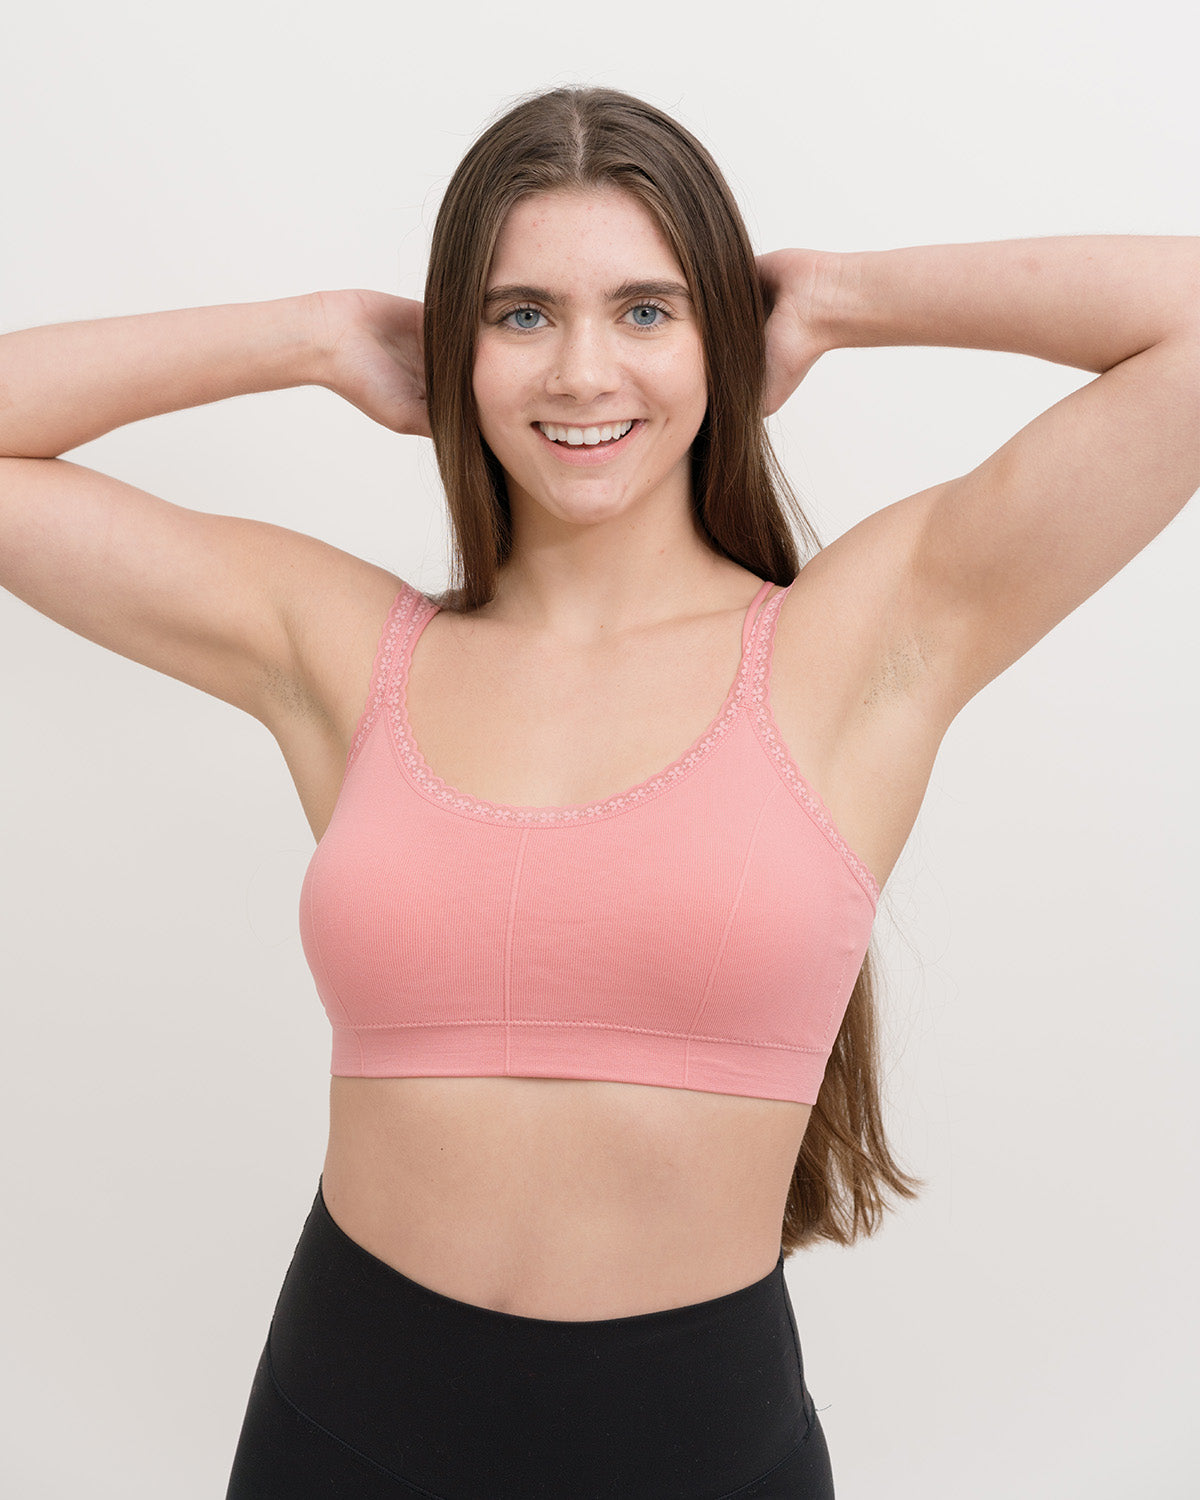 Knosfe Wireless Bra for Women Lace Solid Criss Cross Comfort